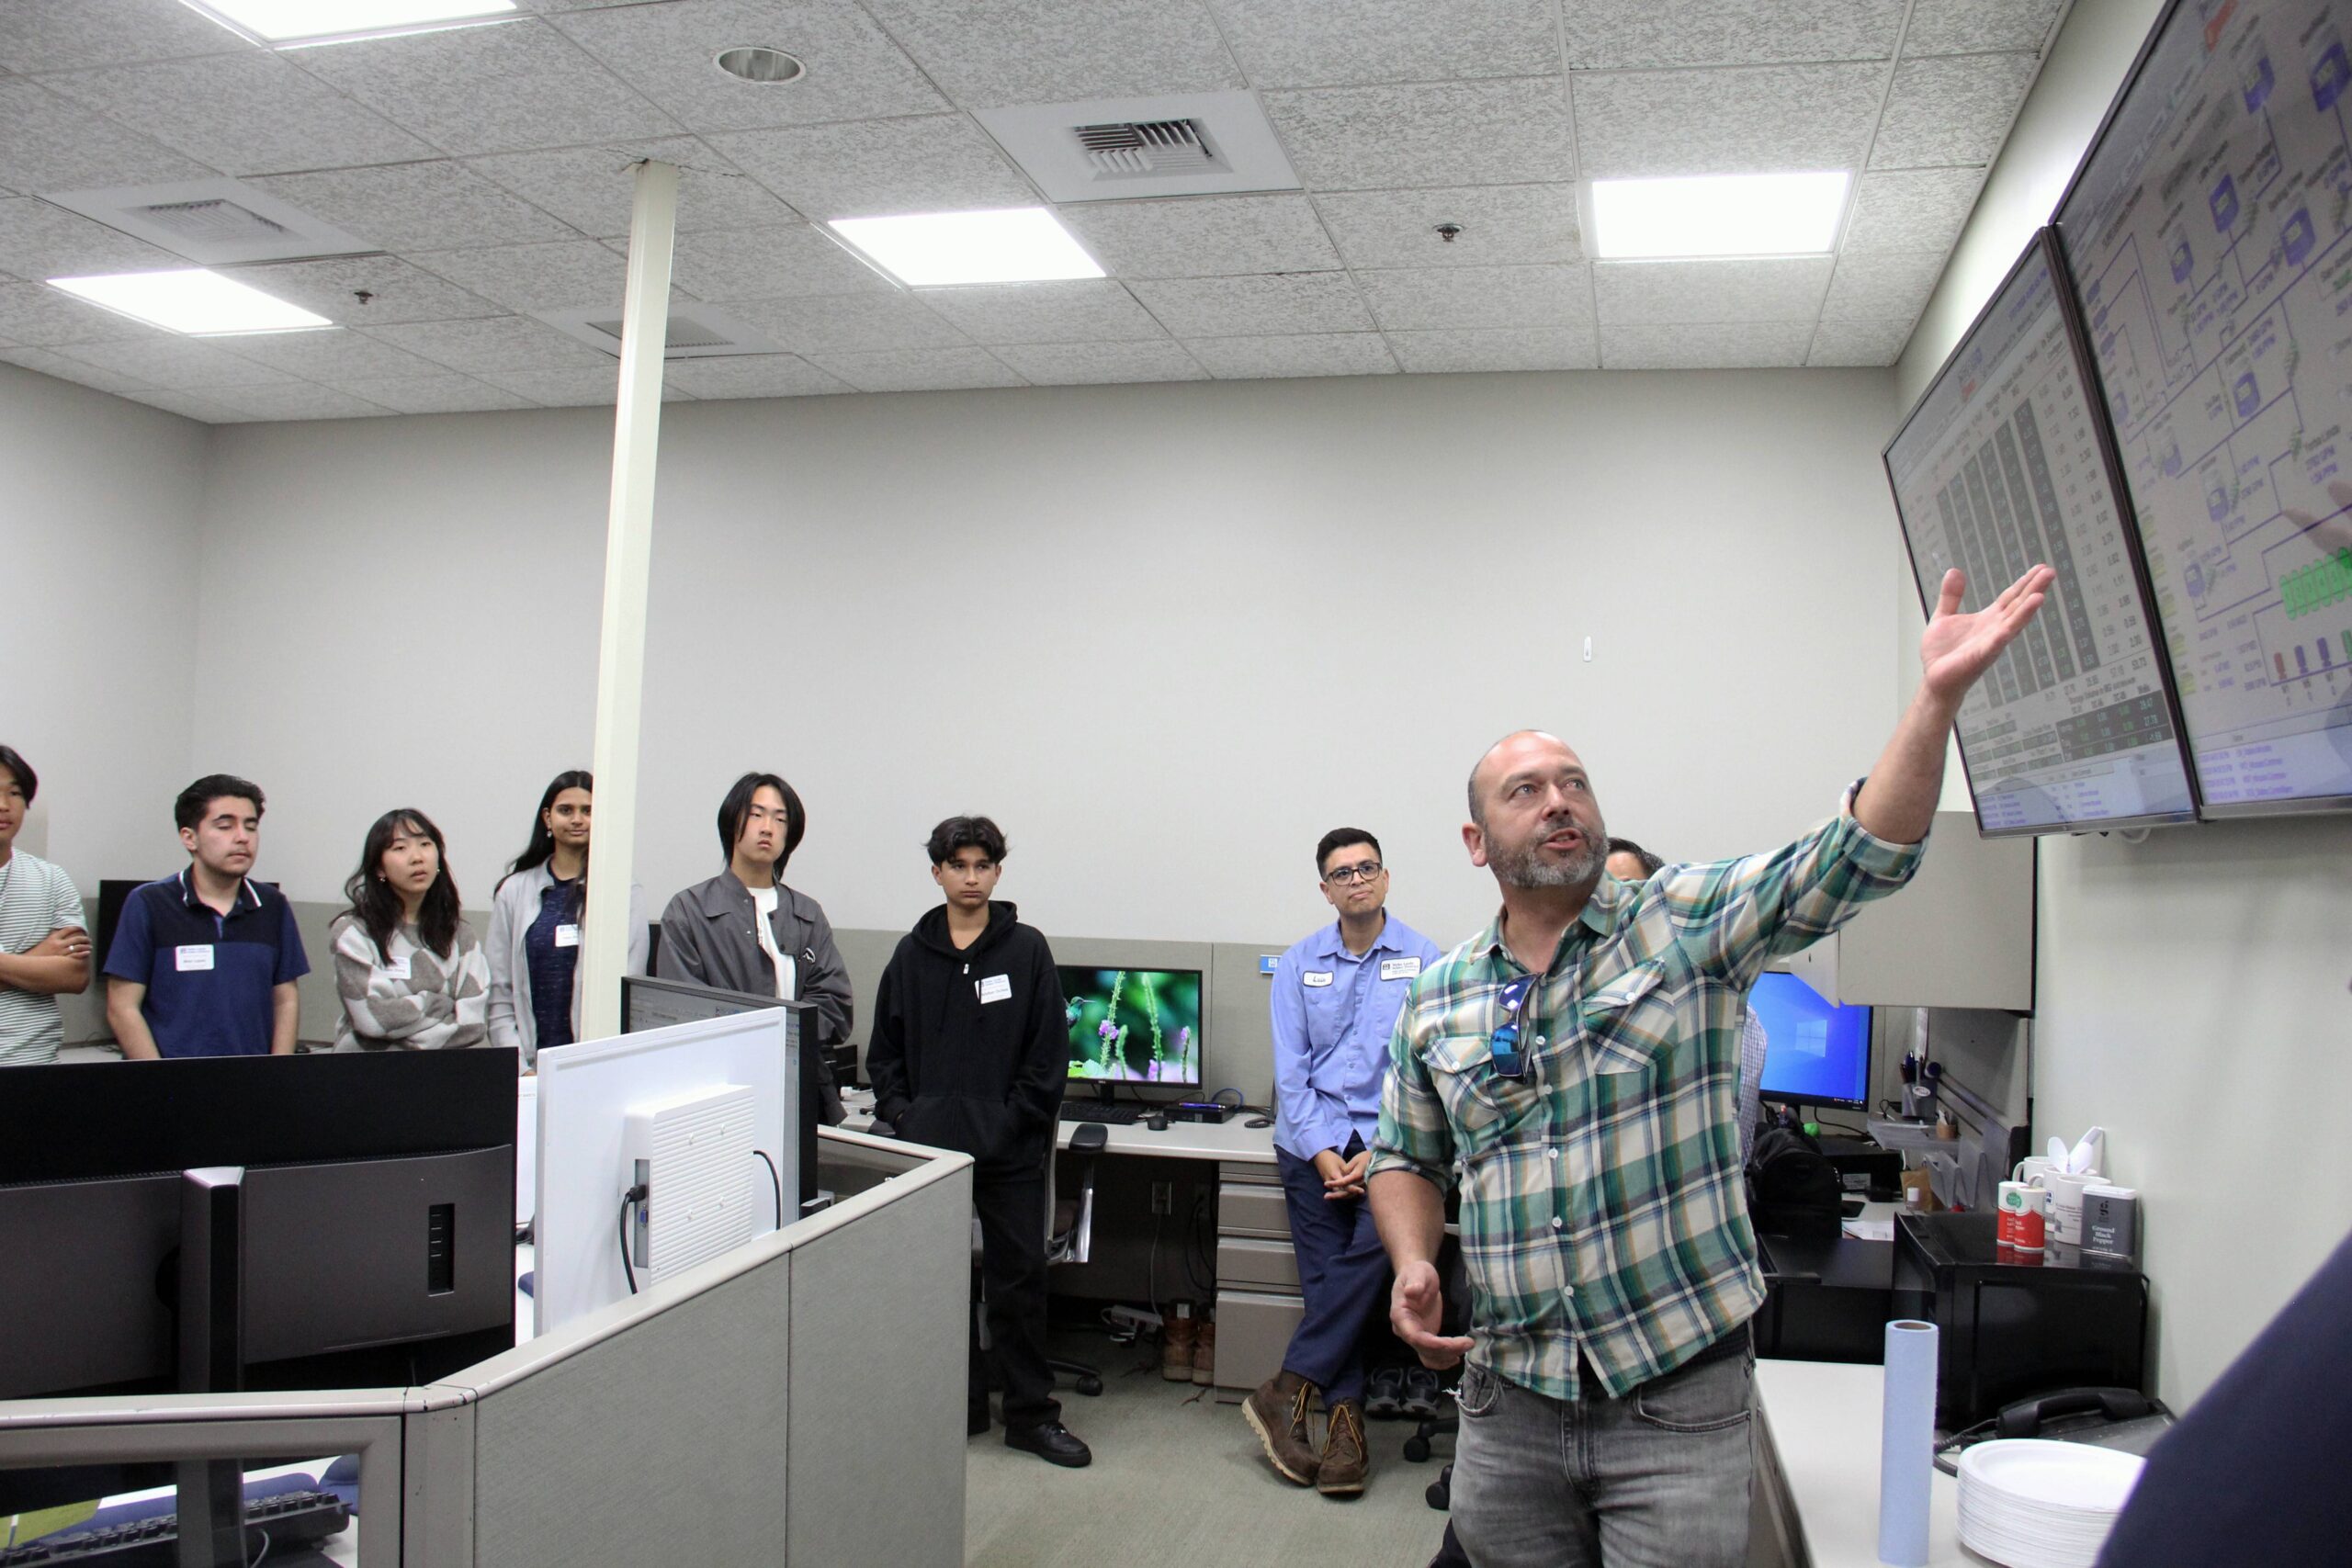 Todd gives students a tour of SCADA.